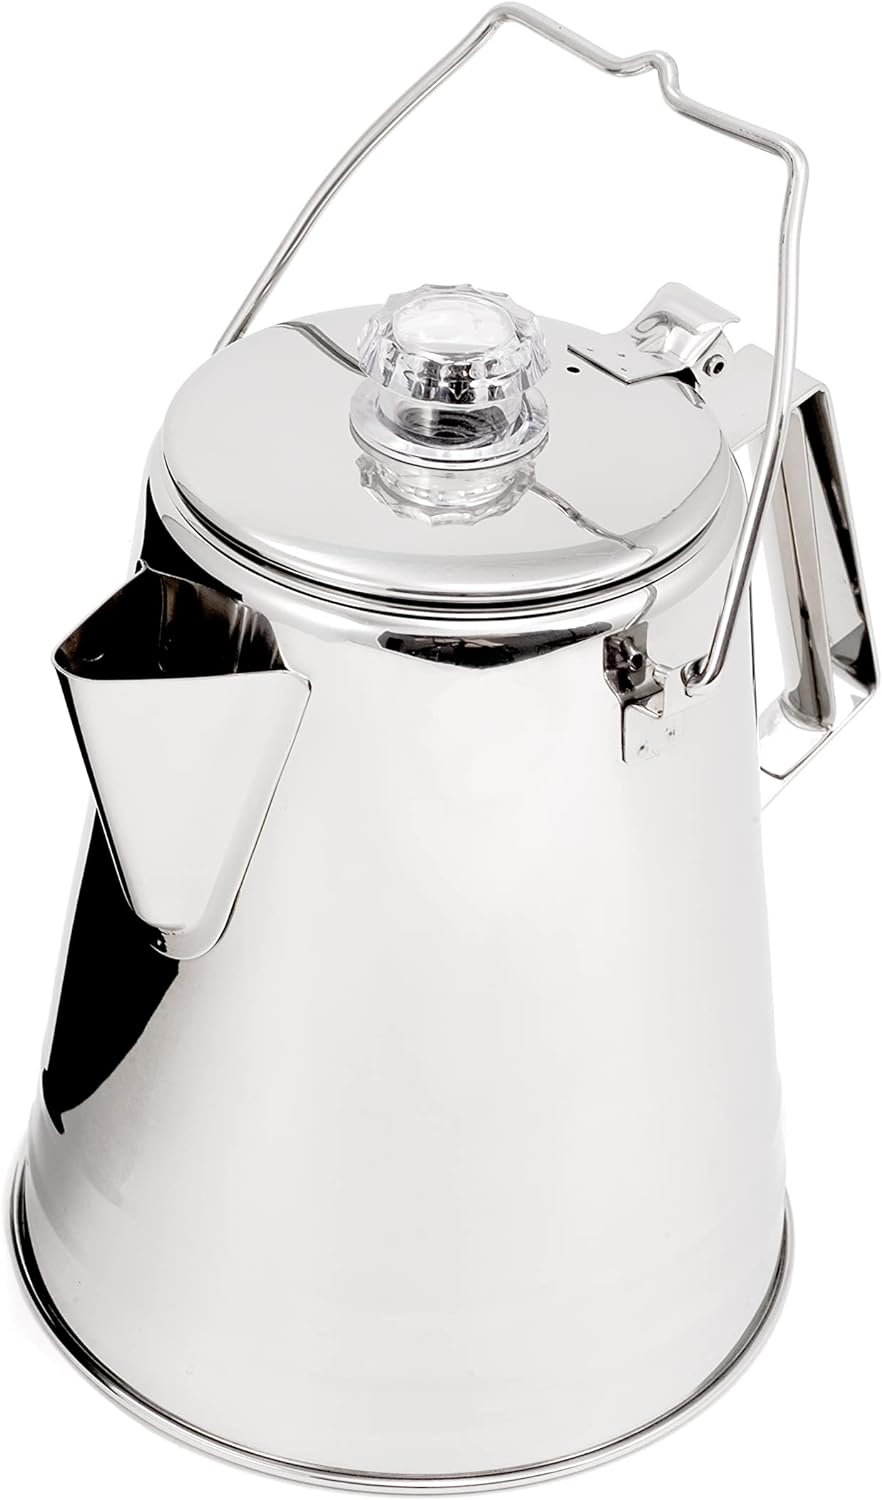 GSI Outdoors Percolator Coffee Pot I Glacier Stainless Steel Ultra-Rugged for Brewing Coffee Over Stove and Fire | Ideal for Group Camping, 28 Cup